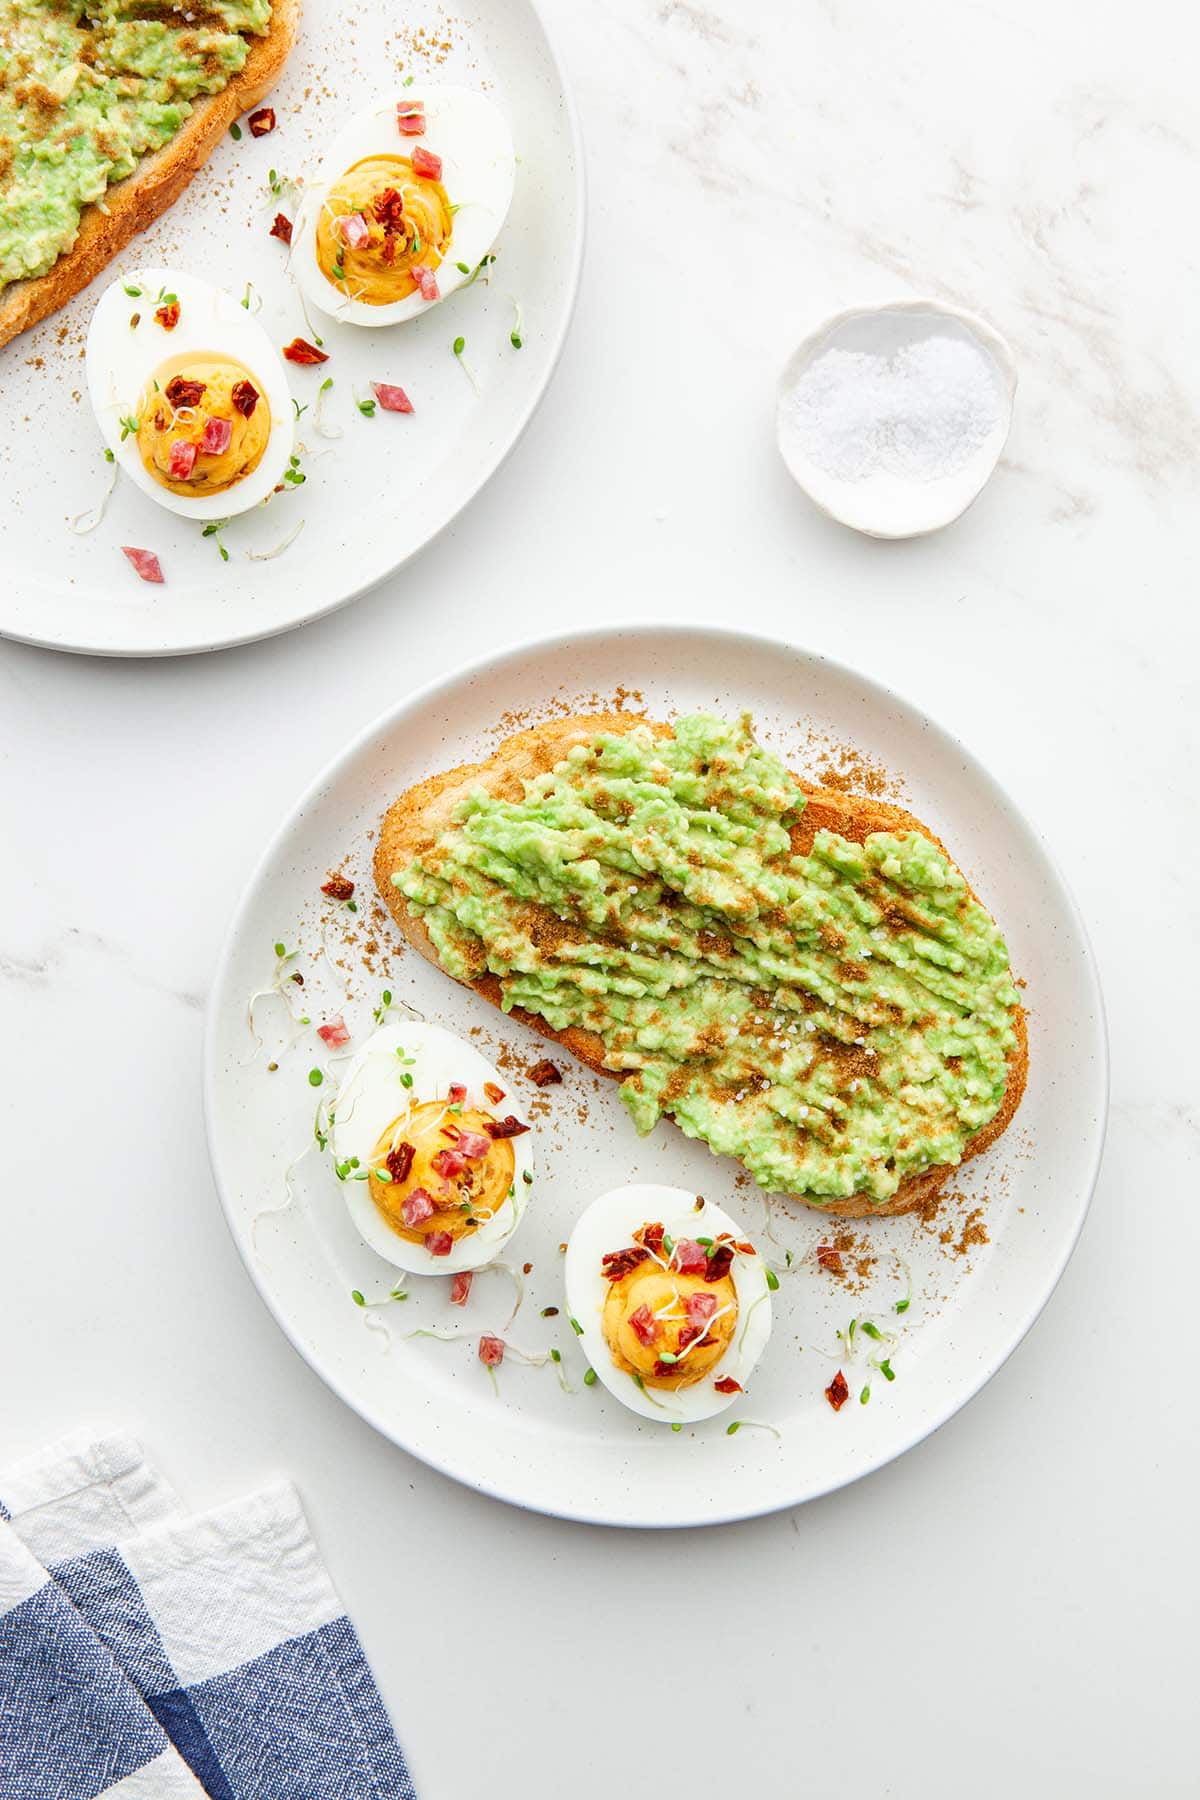 Two plate of avocado toast, each with two sriracha deviled eggs, with a small organically-shaped porcelain dish of coarse salt nearby.